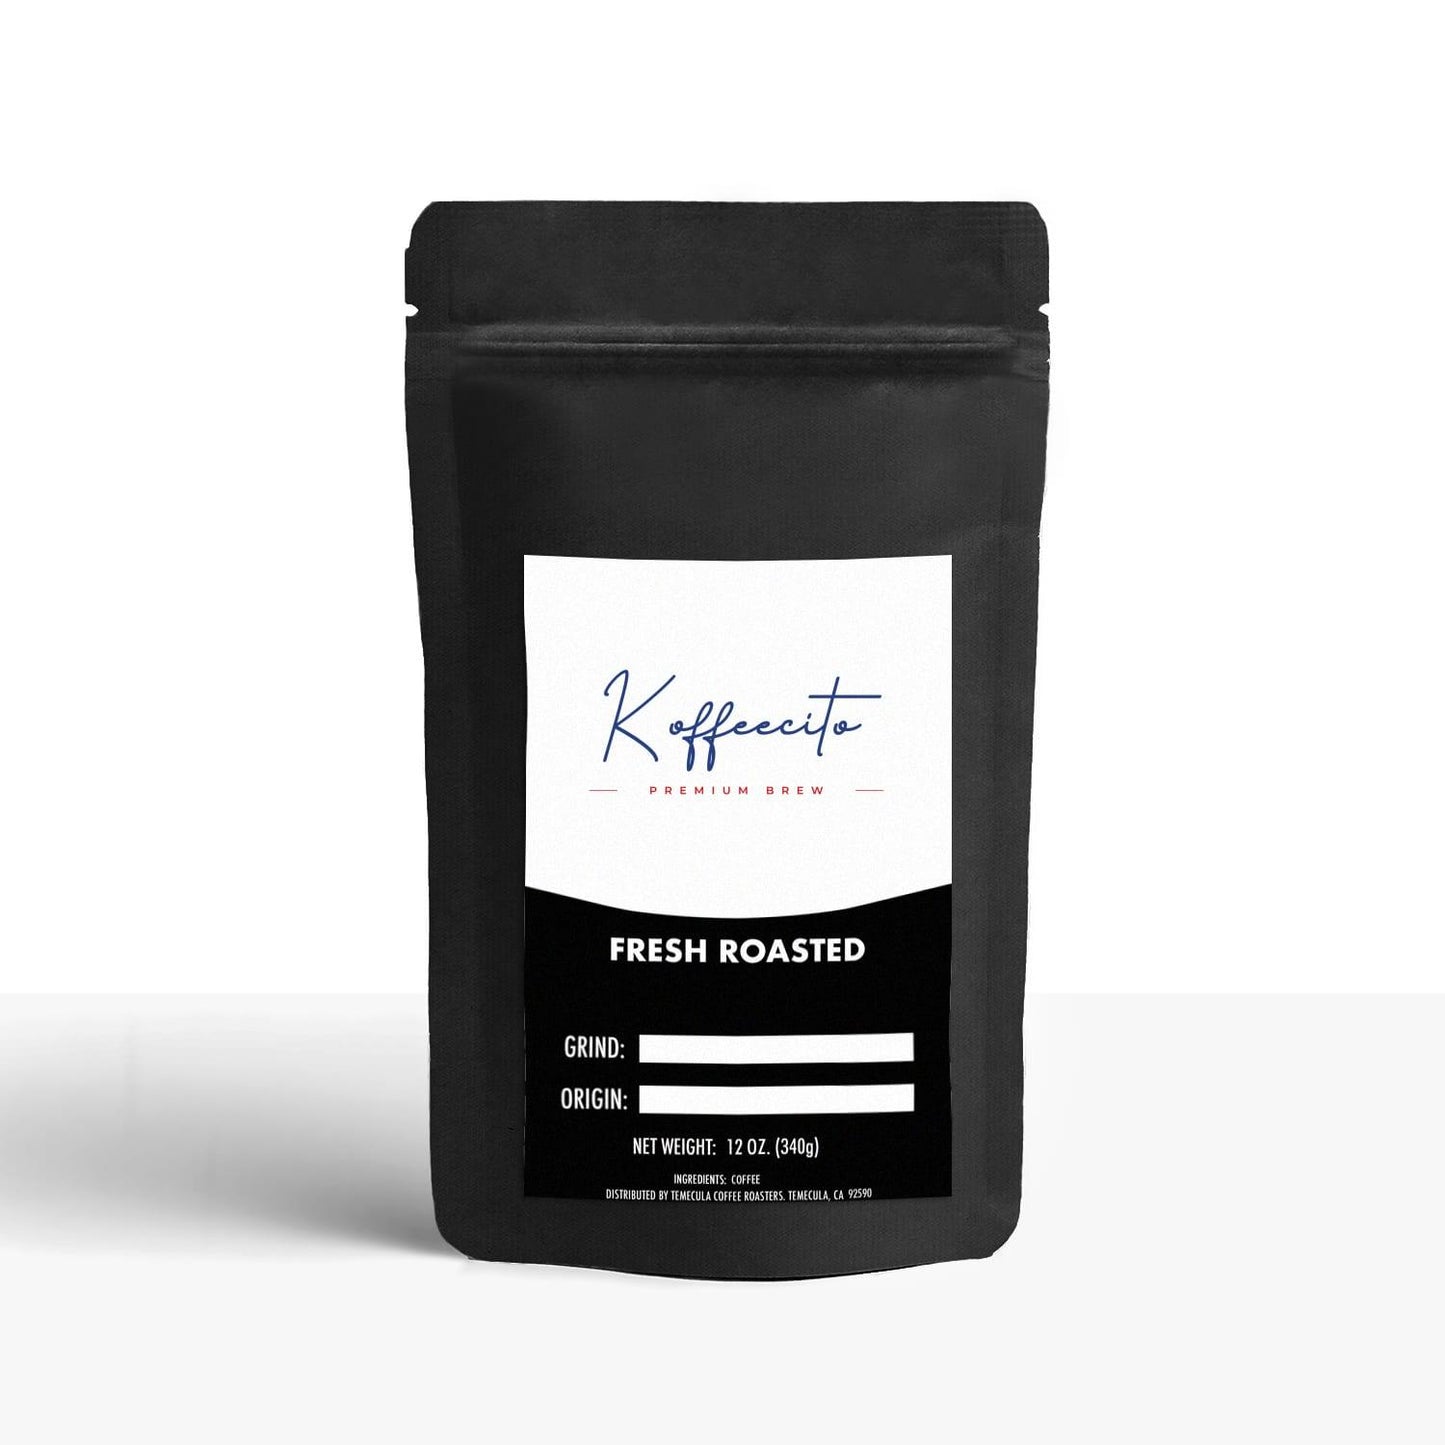 Mint flavored coffee - Koffeecito